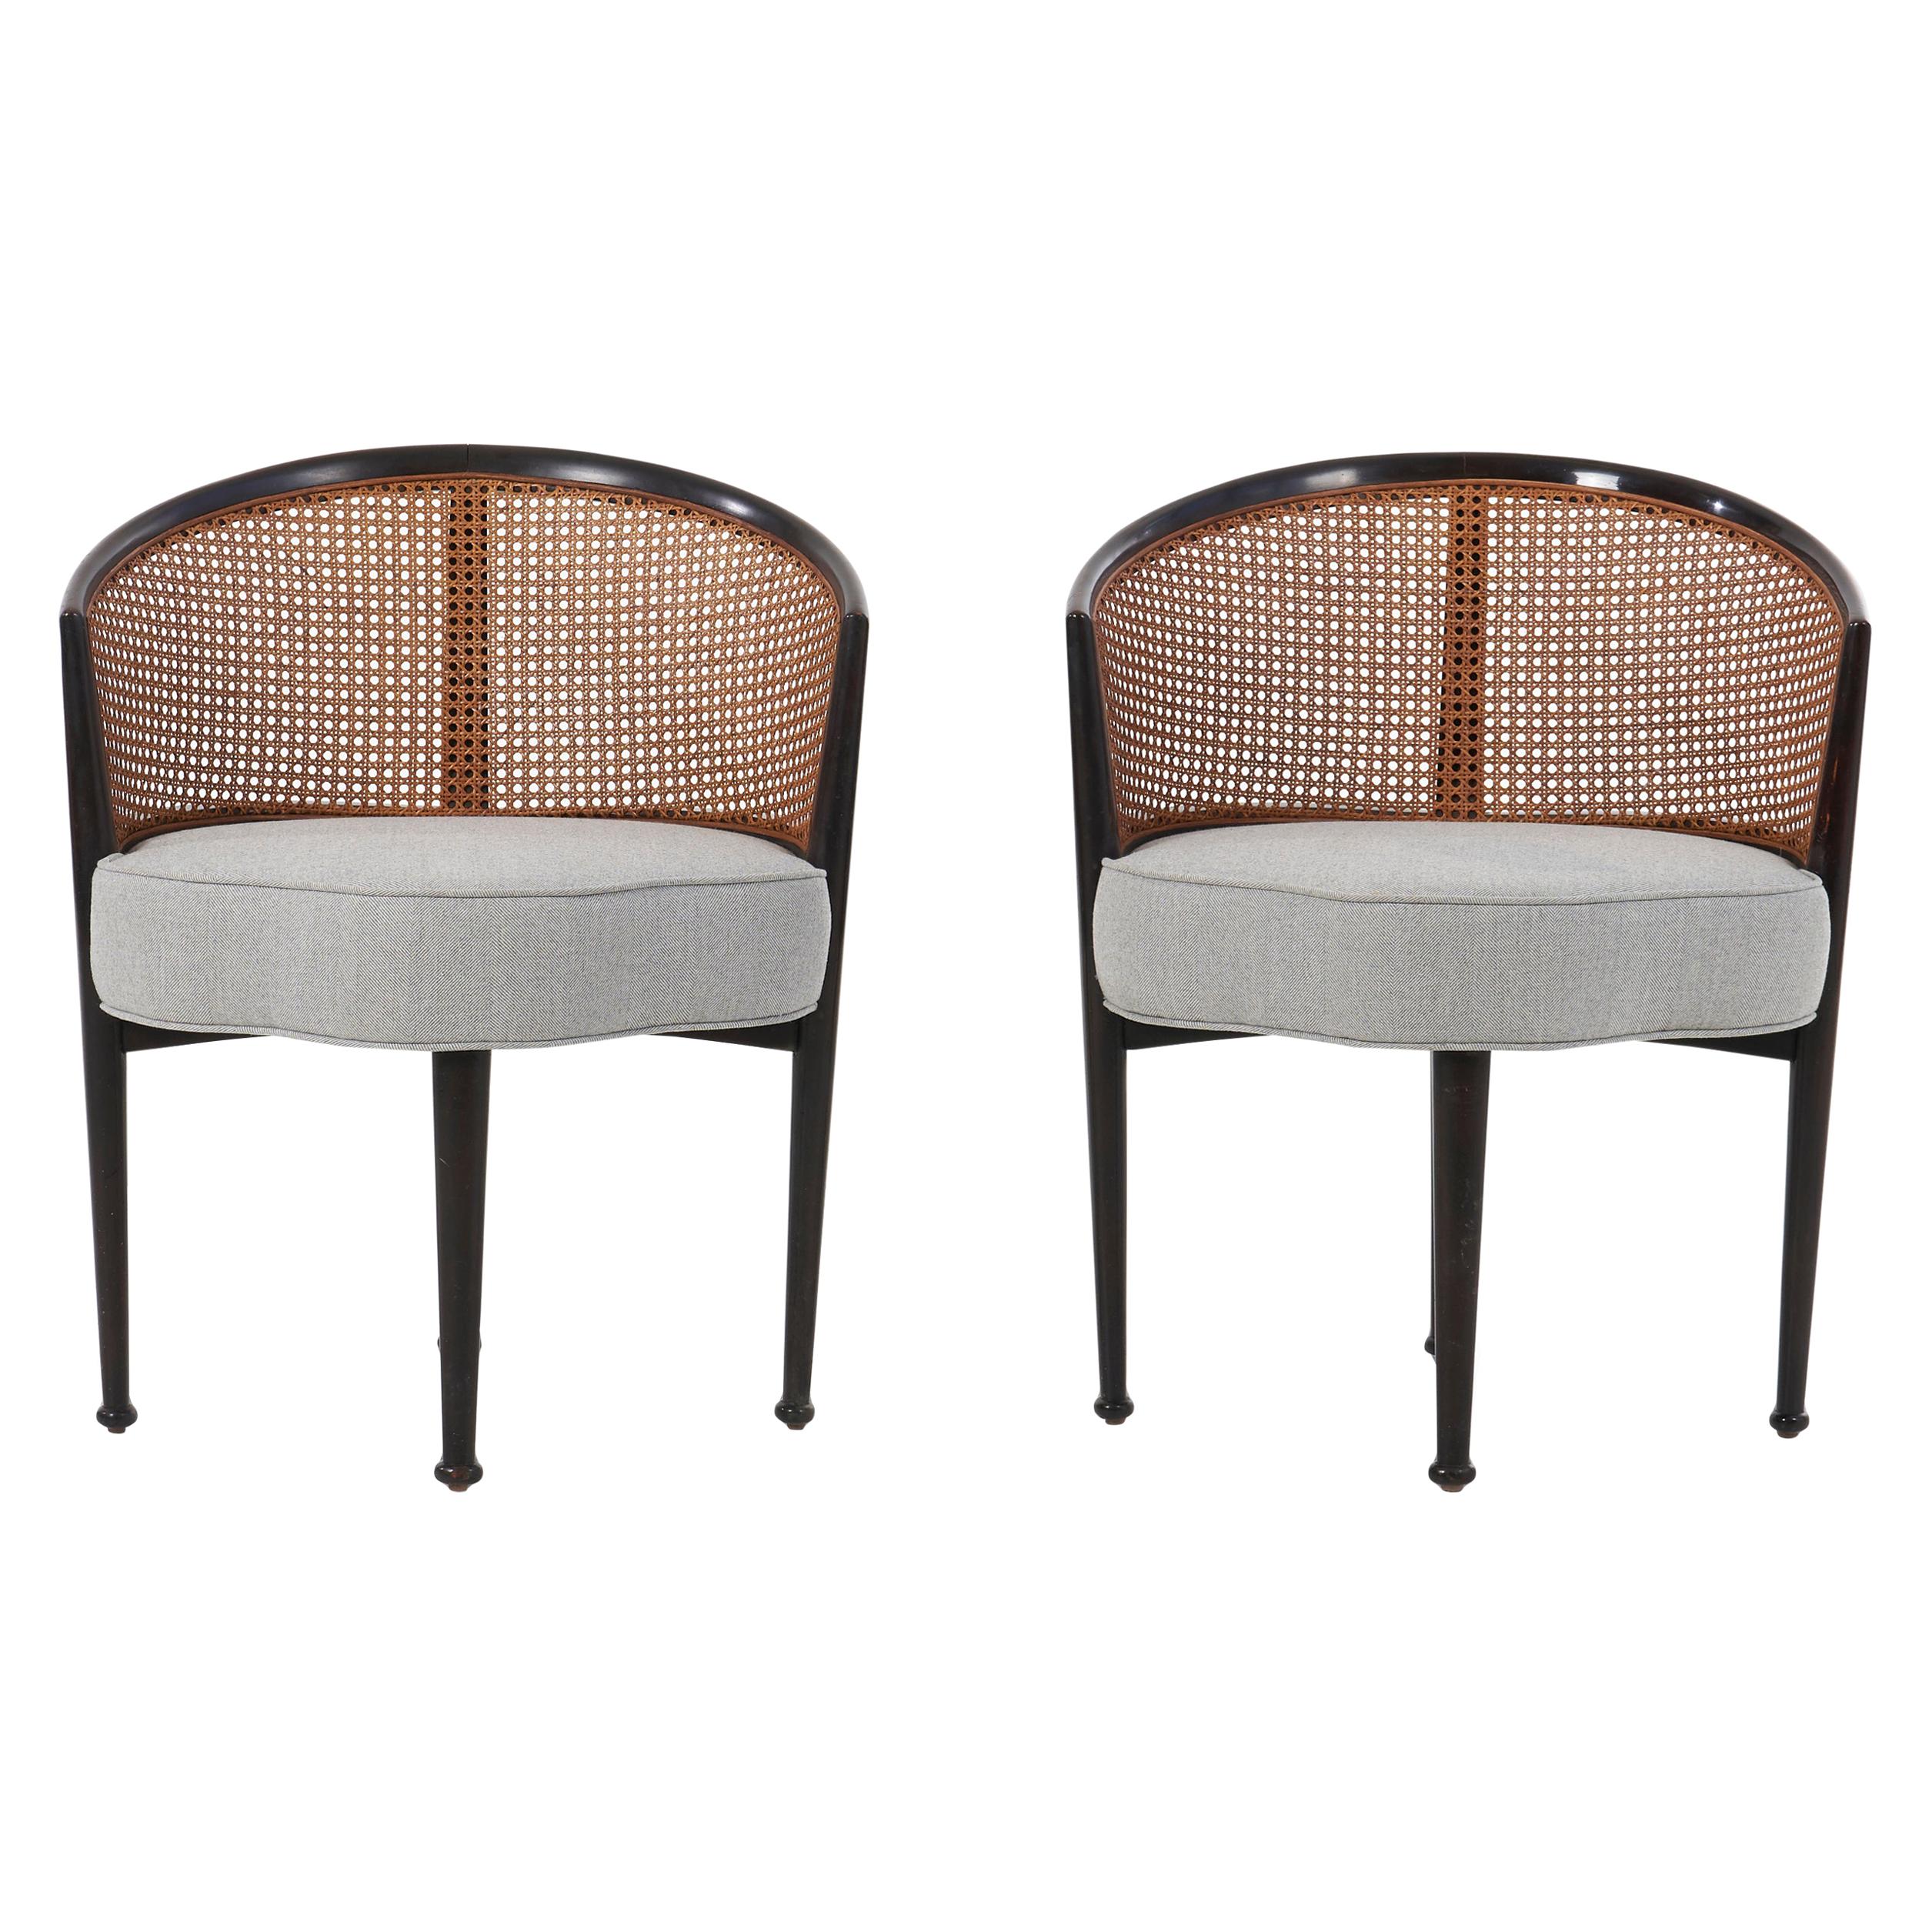 Edward Wormley Curved Back Chairs